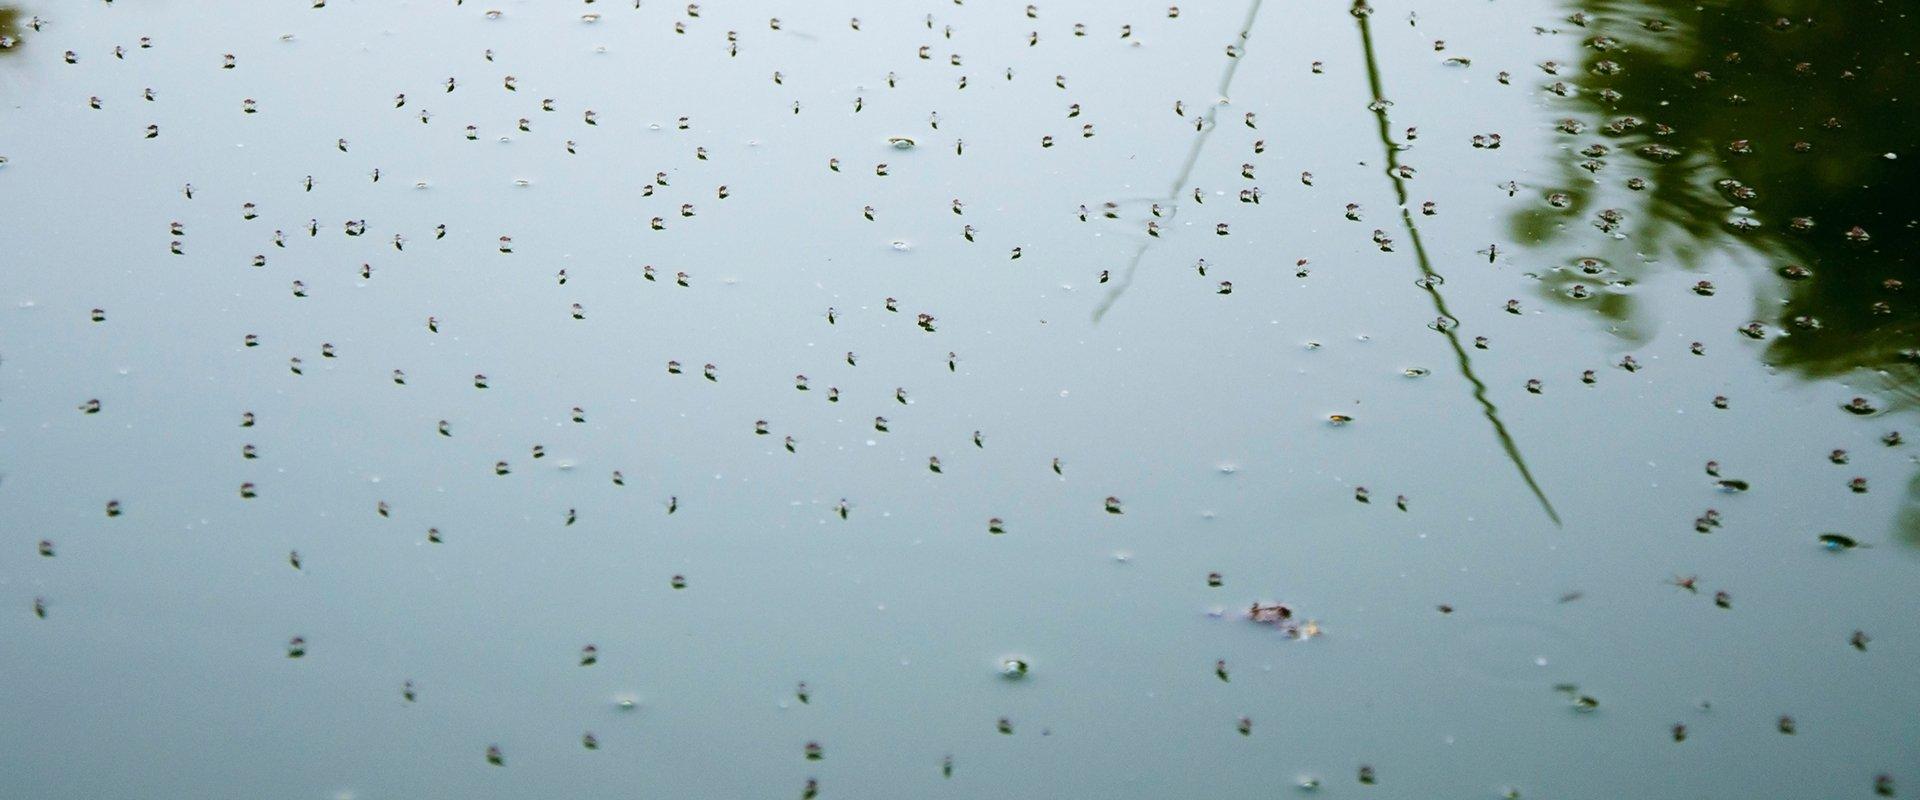 mosquitos swarming above water